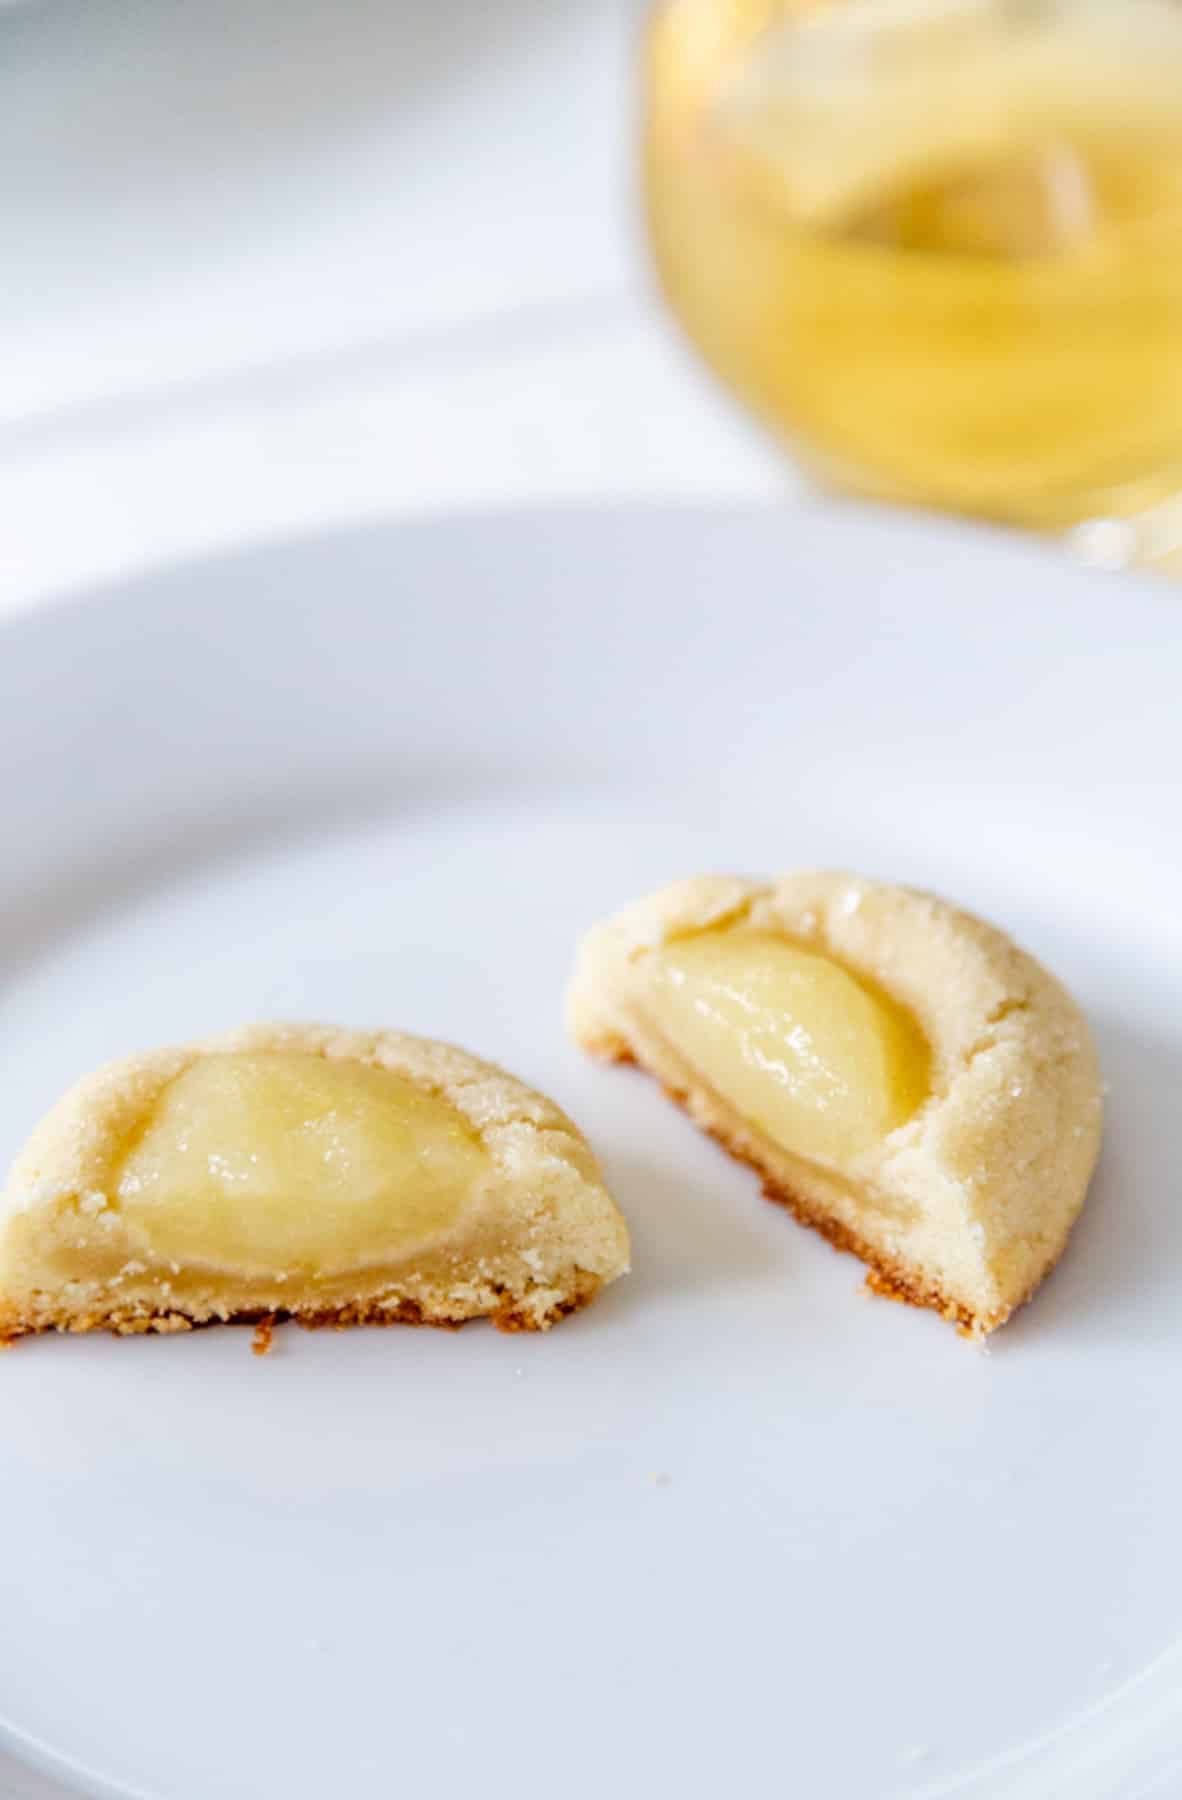 A lemon thumbprint cookie broken in half on a white plate with a glass of wine in the background.